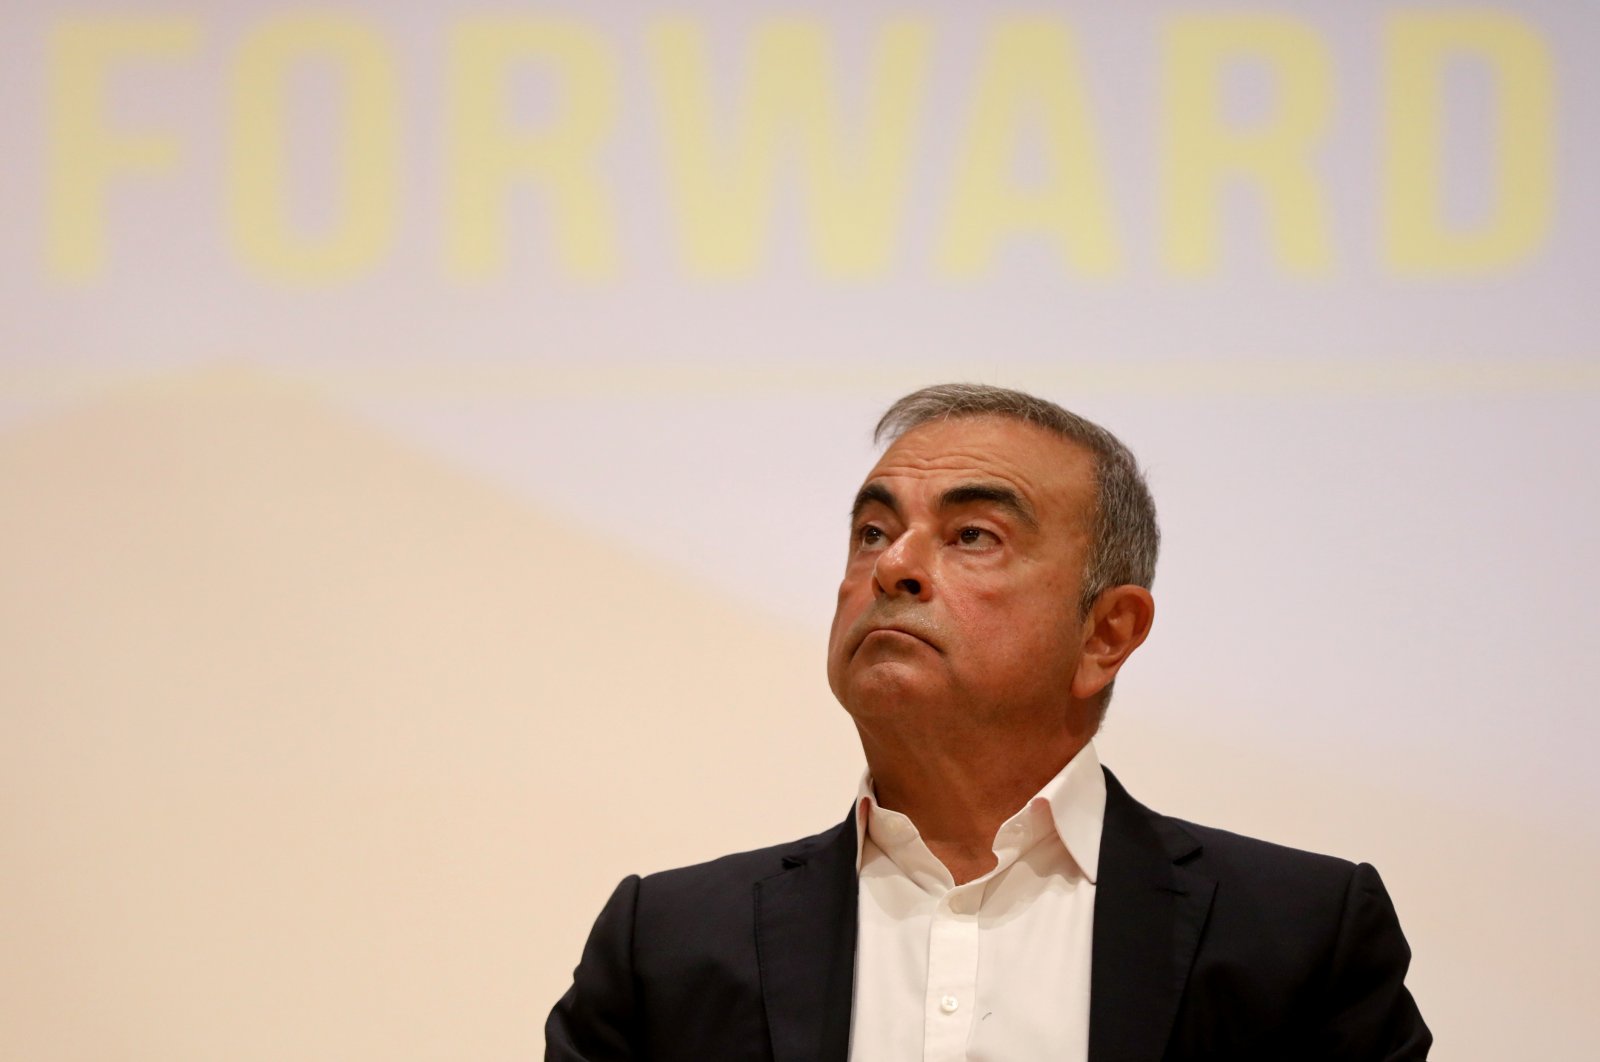 Carlos Ghosn, the former Nissan and Renault chief executive, looks on during a news conference at the Holy Spirit University of Kaslik, in Jounieh, Lebanon, Sept. 29, 2020. (Reuters Photo)